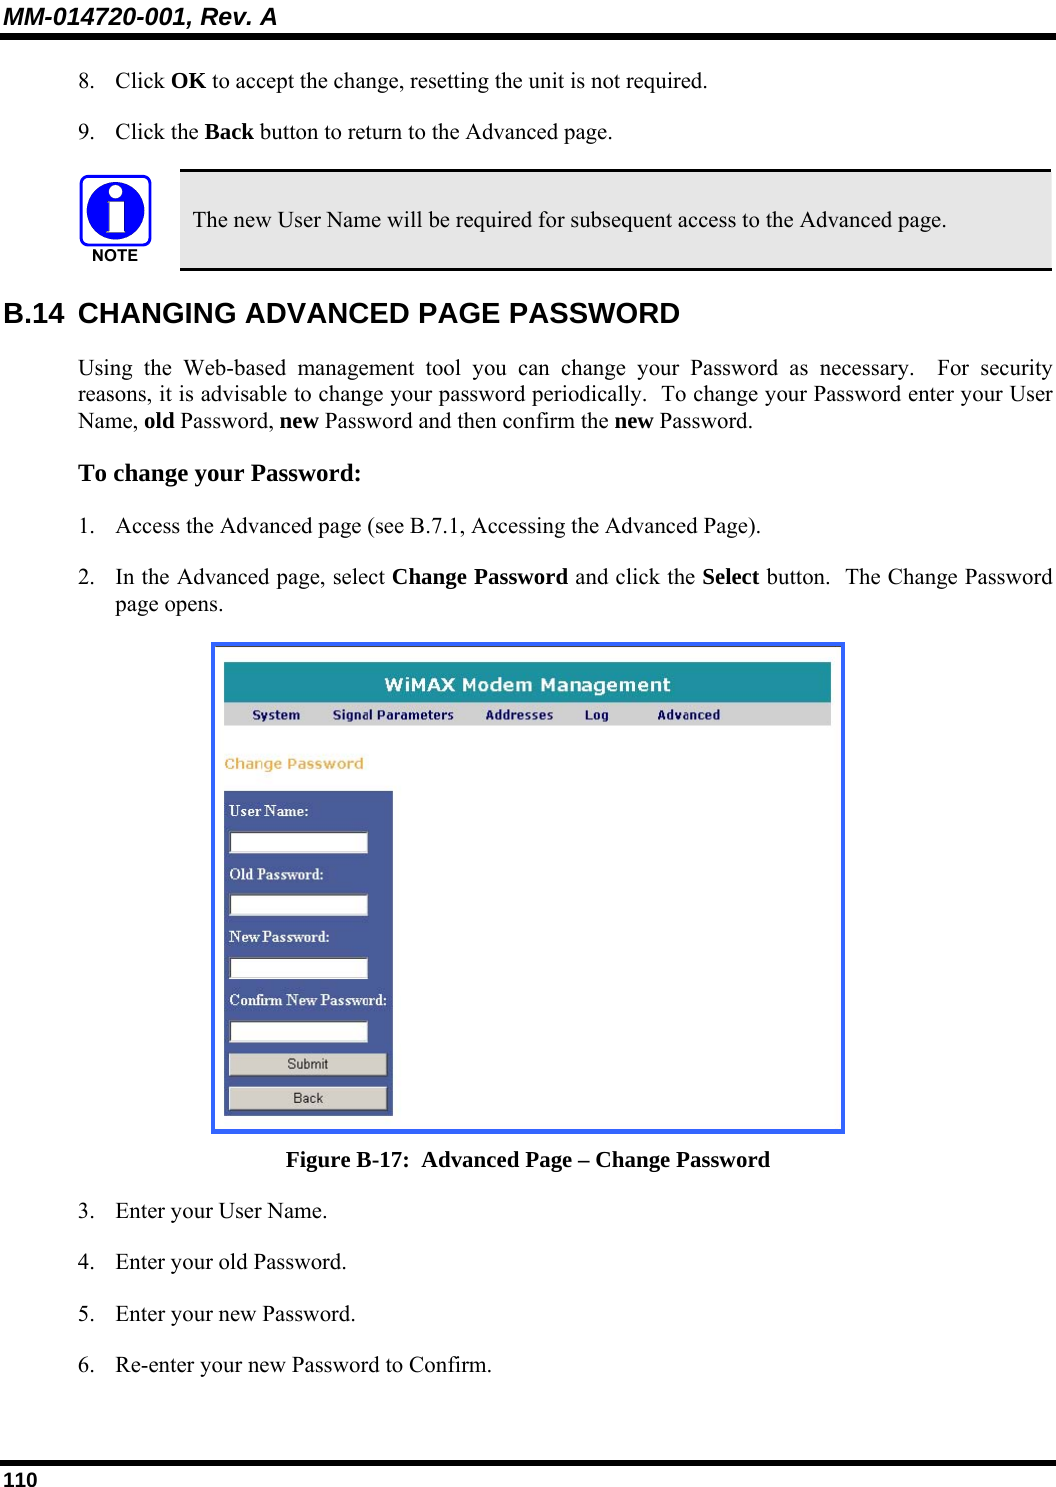 MM-014720-001, Rev. A 110 8. Click OK to accept the change, resetting the unit is not required. 9. Click the Back button to return to the Advanced page.   The new User Name will be required for subsequent access to the Advanced page. B.14  CHANGING ADVANCED PAGE PASSWORD Using the Web-based management tool you can change your Password as necessary.  For security reasons, it is advisable to change your password periodically.  To change your Password enter your User Name, old Password, new Password and then confirm the new Password.  To change your Password:  1. Access the Advanced page (see B.7.1, Accessing the Advanced Page).  2. In the Advanced page, select Change Password and click the Select button.  The Change Password page opens.   Figure B-17:  Advanced Page – Change Password 3. Enter your User Name. 4. Enter your old Password. 5. Enter your new Password. 6. Re-enter your new Password to Confirm. 